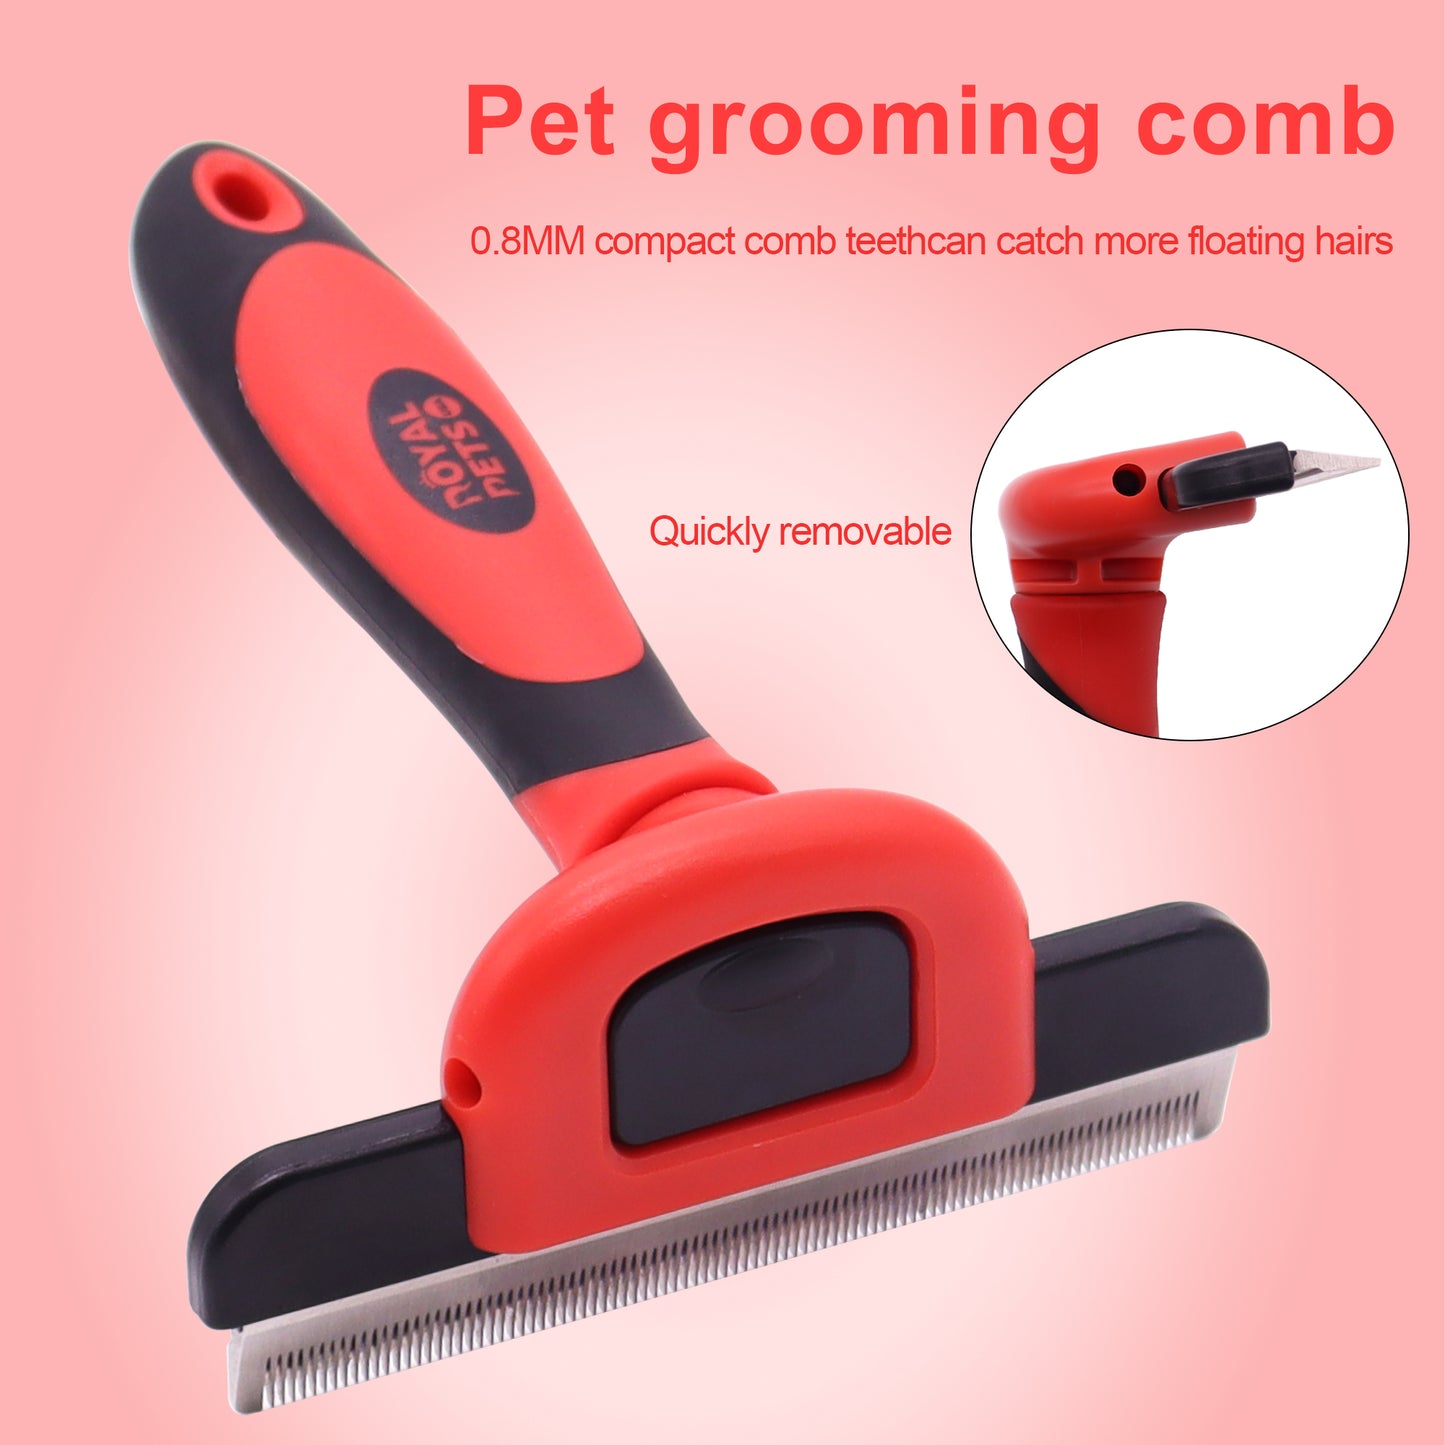 Royal Pets USA Professional Deshedding Brush 83 Teeths for Dogs and Cats with Short or Long Hair Effectively Removes Dead Hair and Untangles Up To 95%. Detachable Head for Easy Cleaning. (Slim Handle)